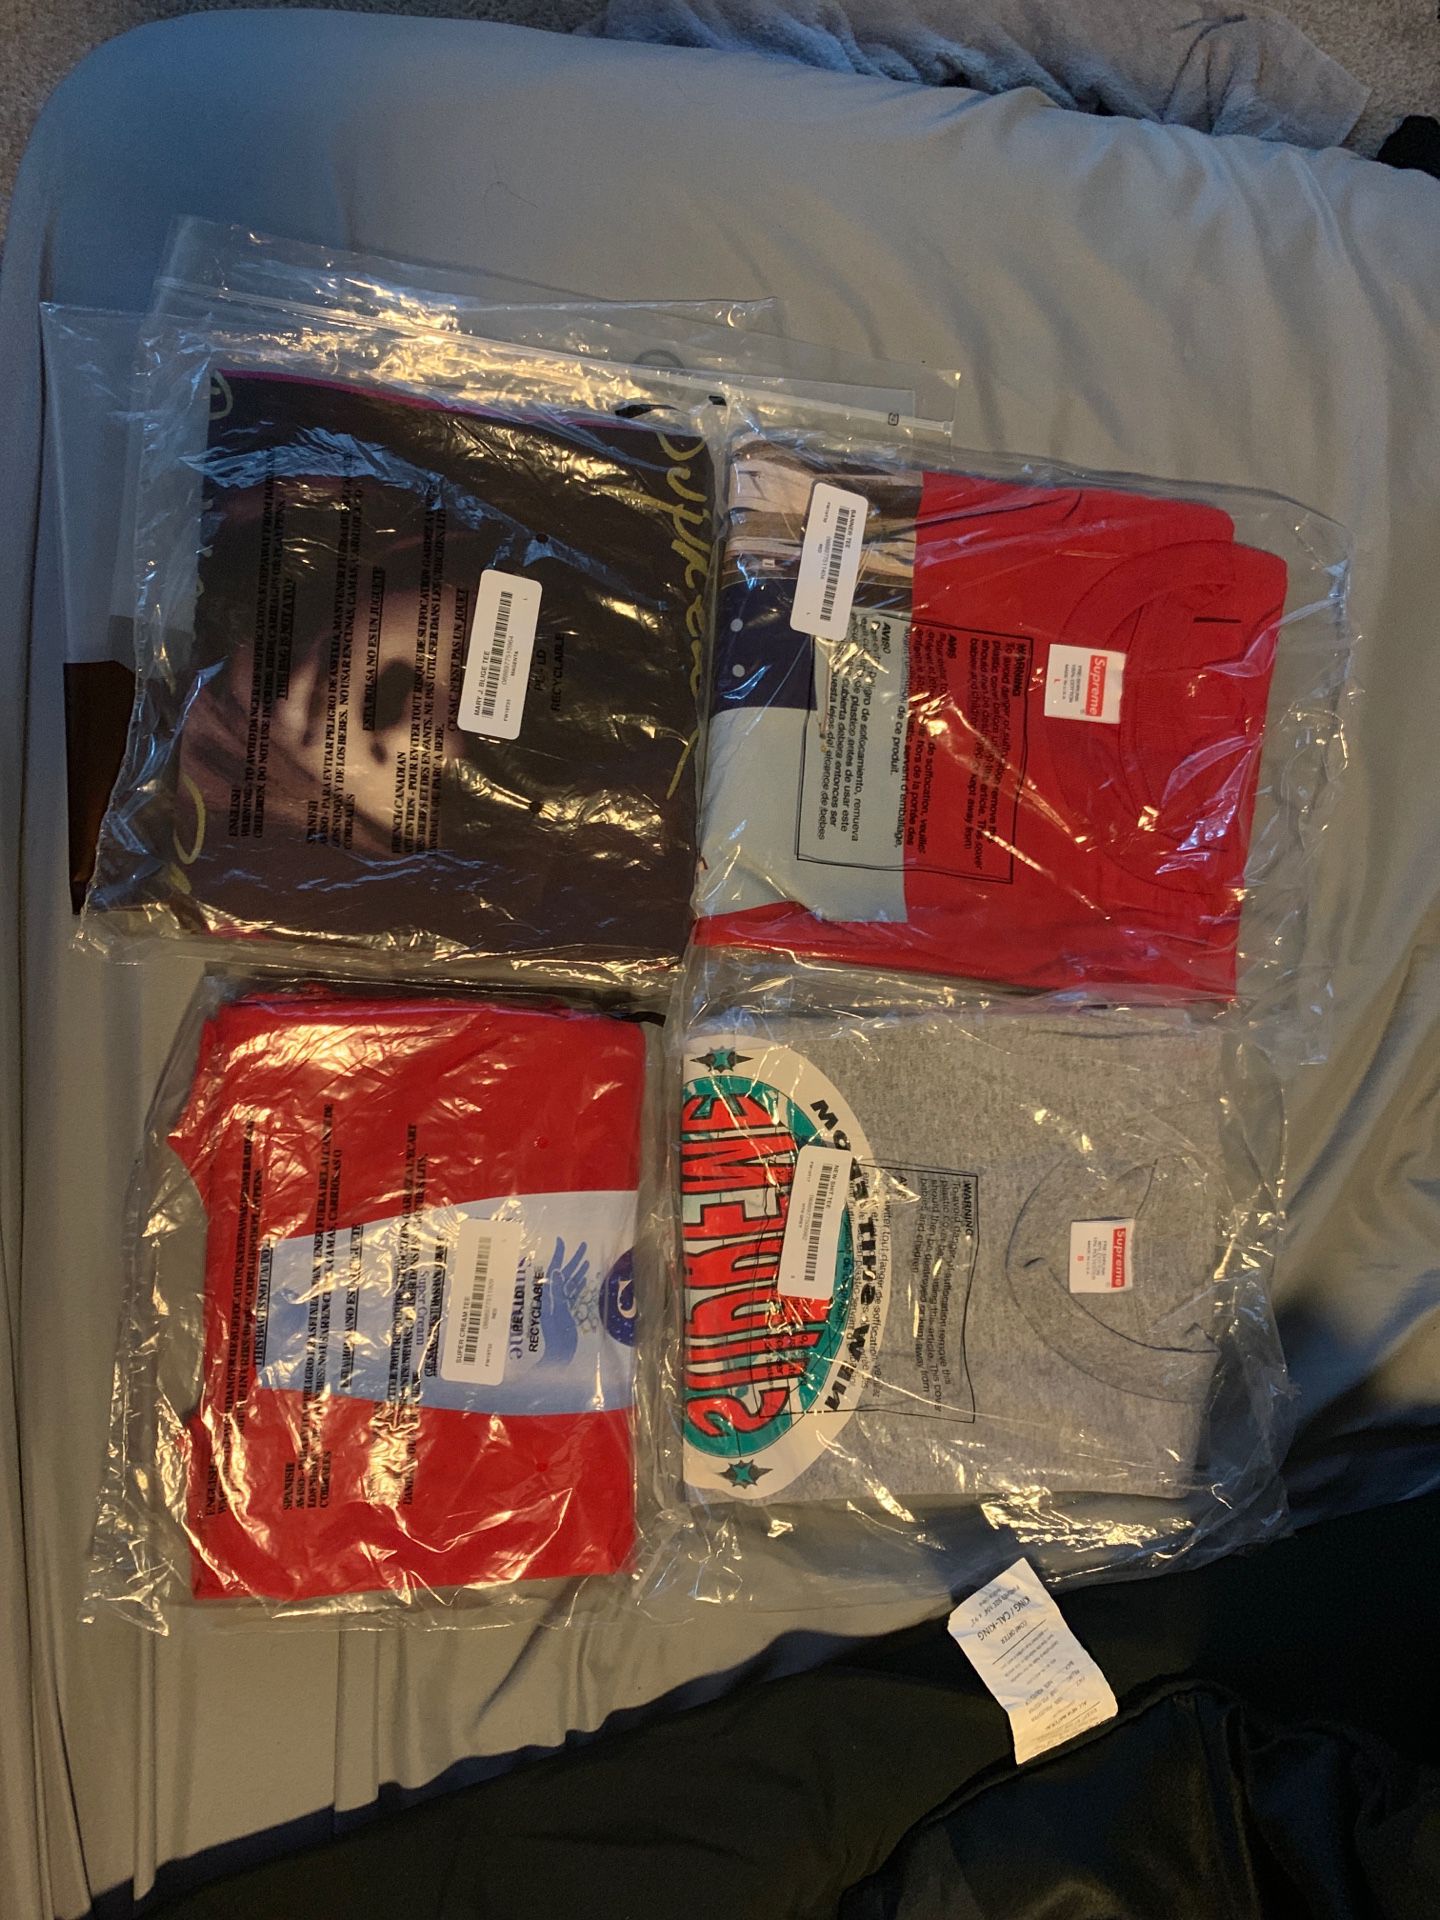 Supreme F/W 19 tees for sale!!! BRAND NEW NEVER OPENED 100% authentic!!!